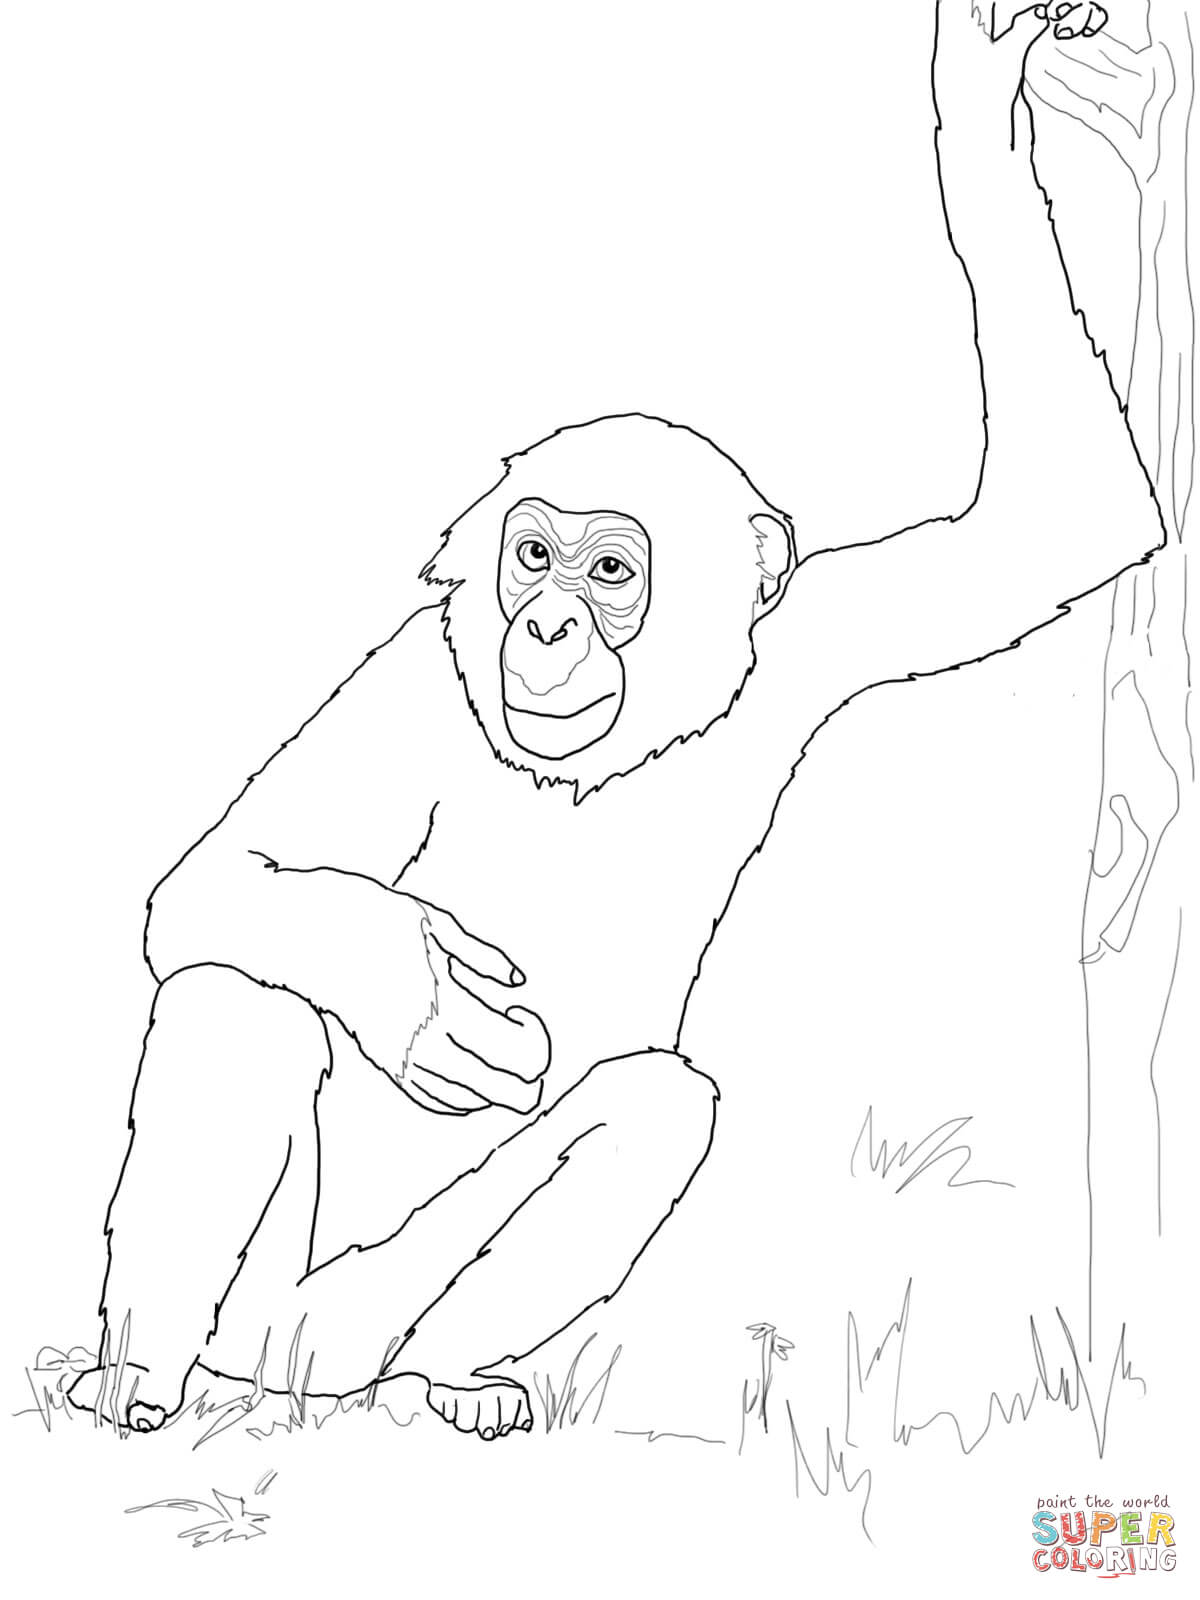 Bonobo Chimpanzee coloring page | Free Printable Coloring Pages